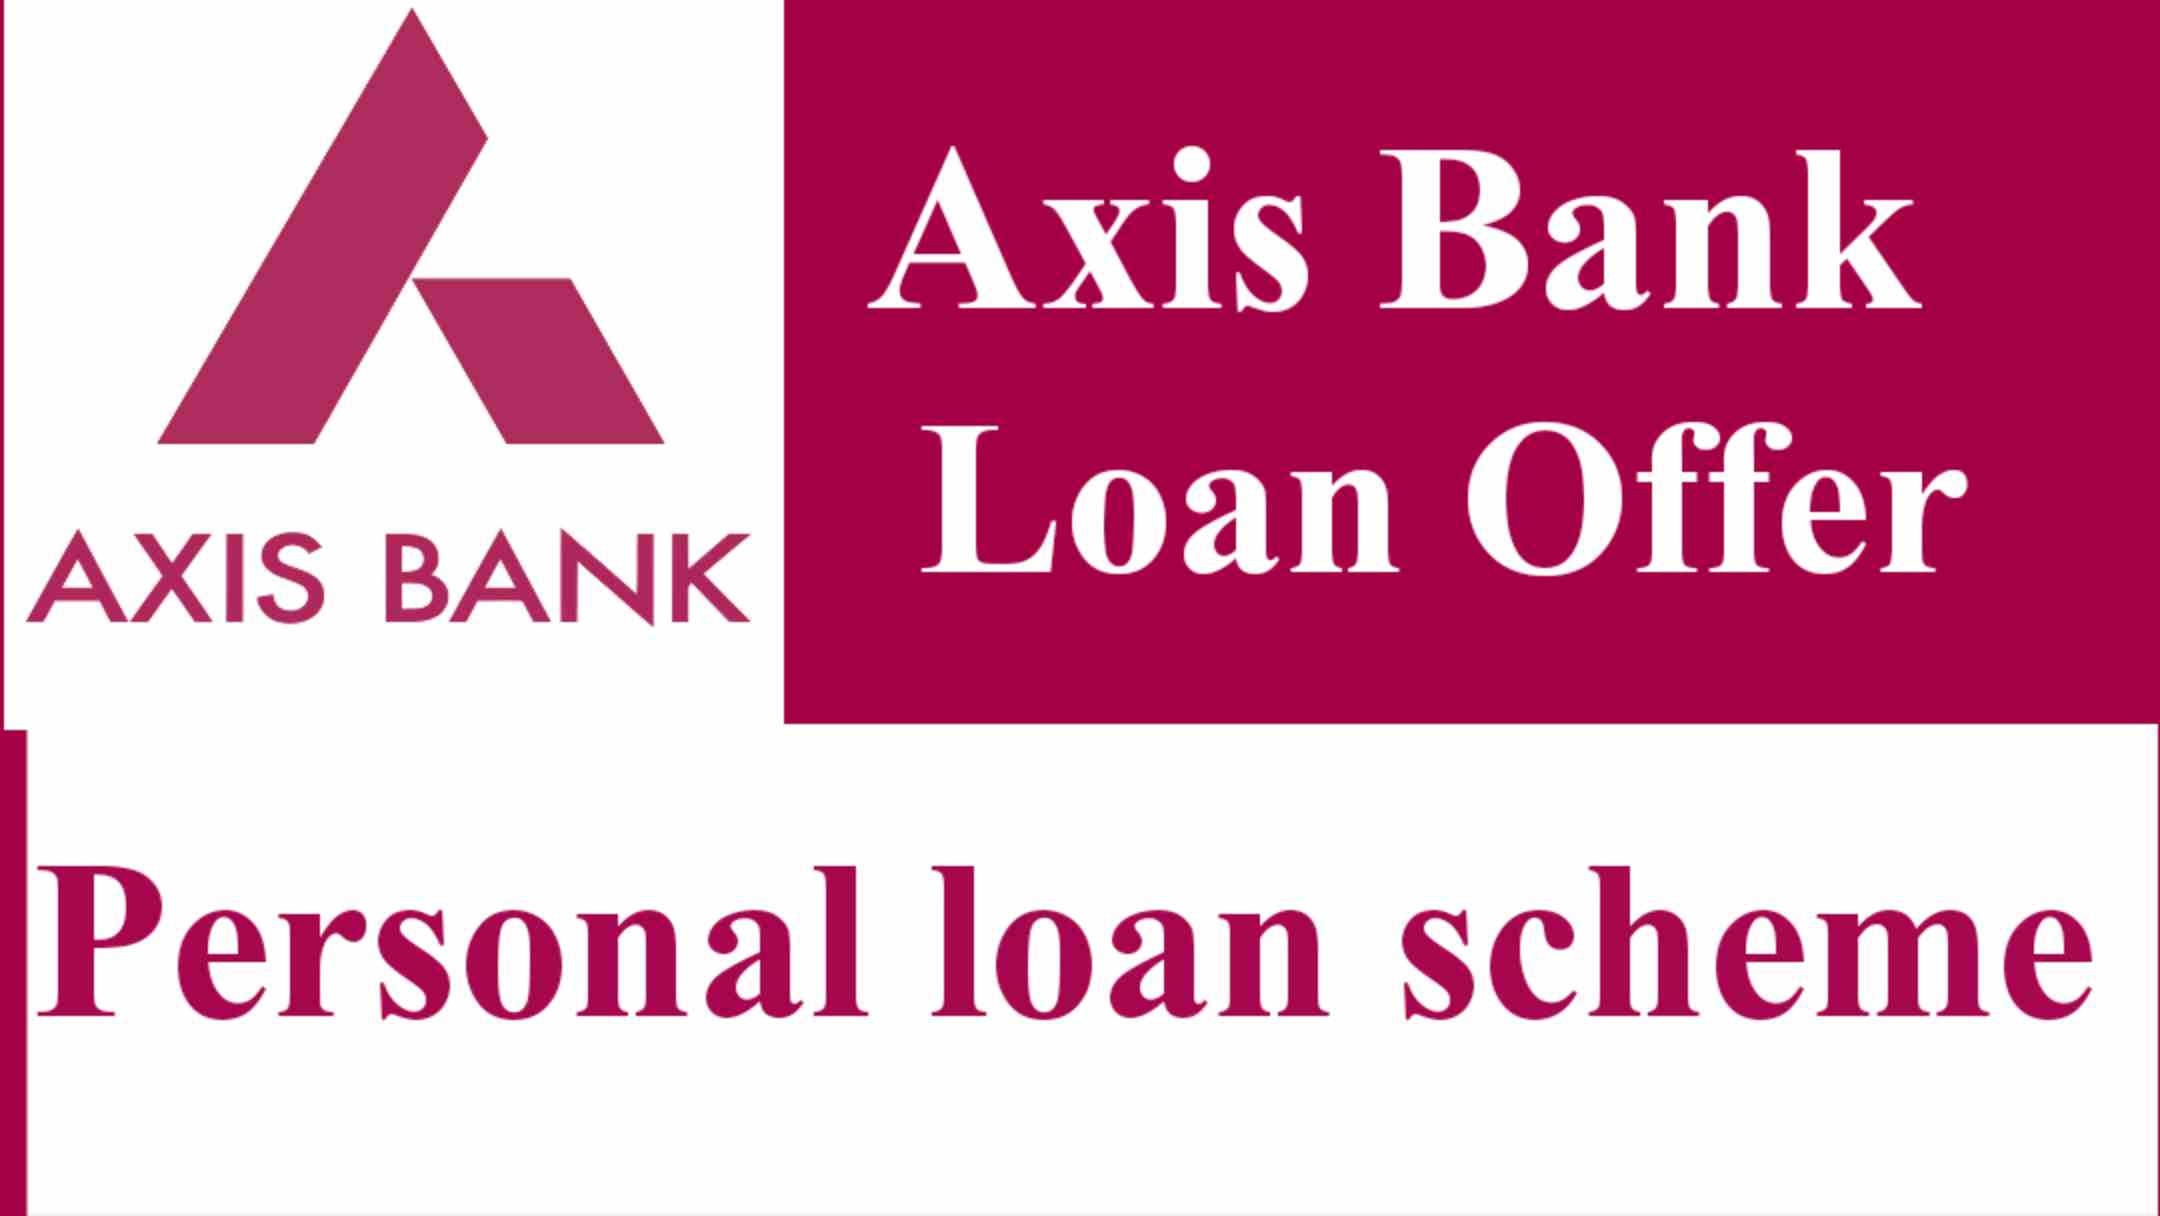 Axis Personal loan 15 Lakh rupees loan will be available in just 5 minutes/